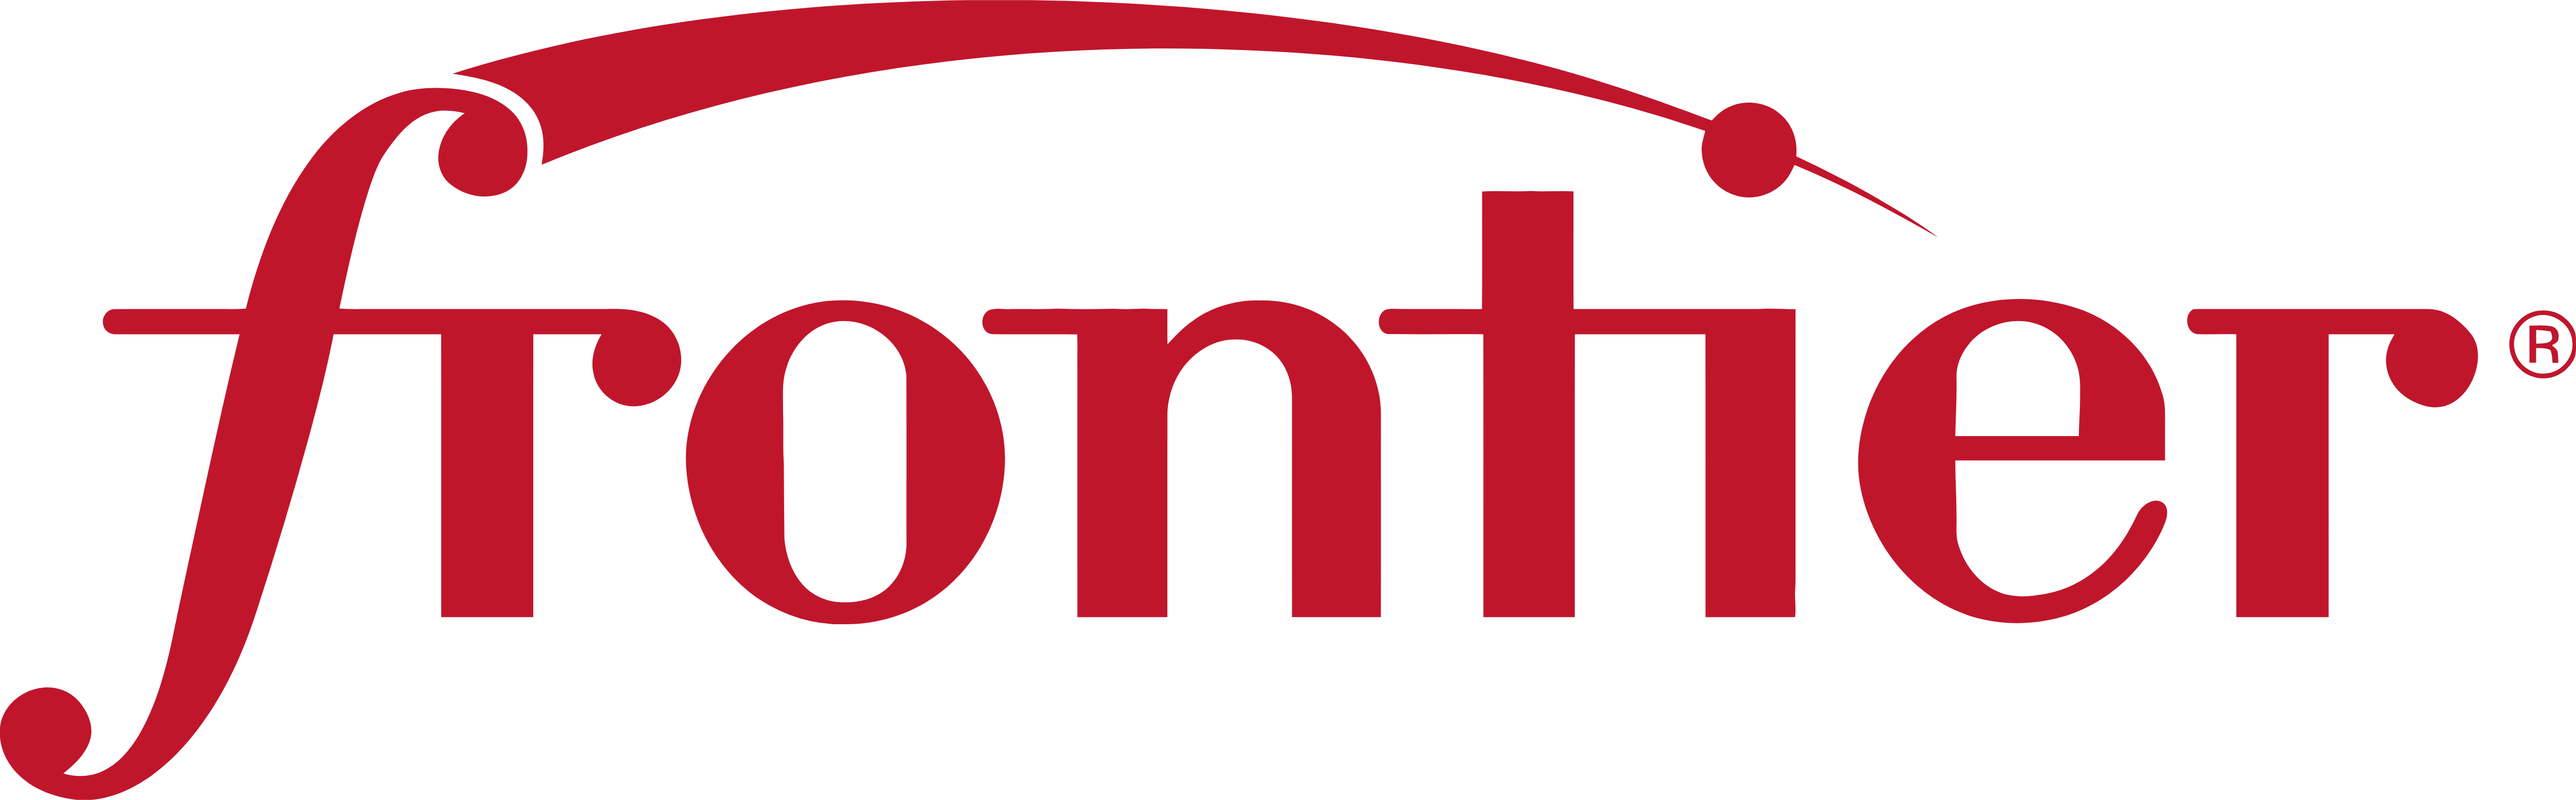 Frontier Communications.